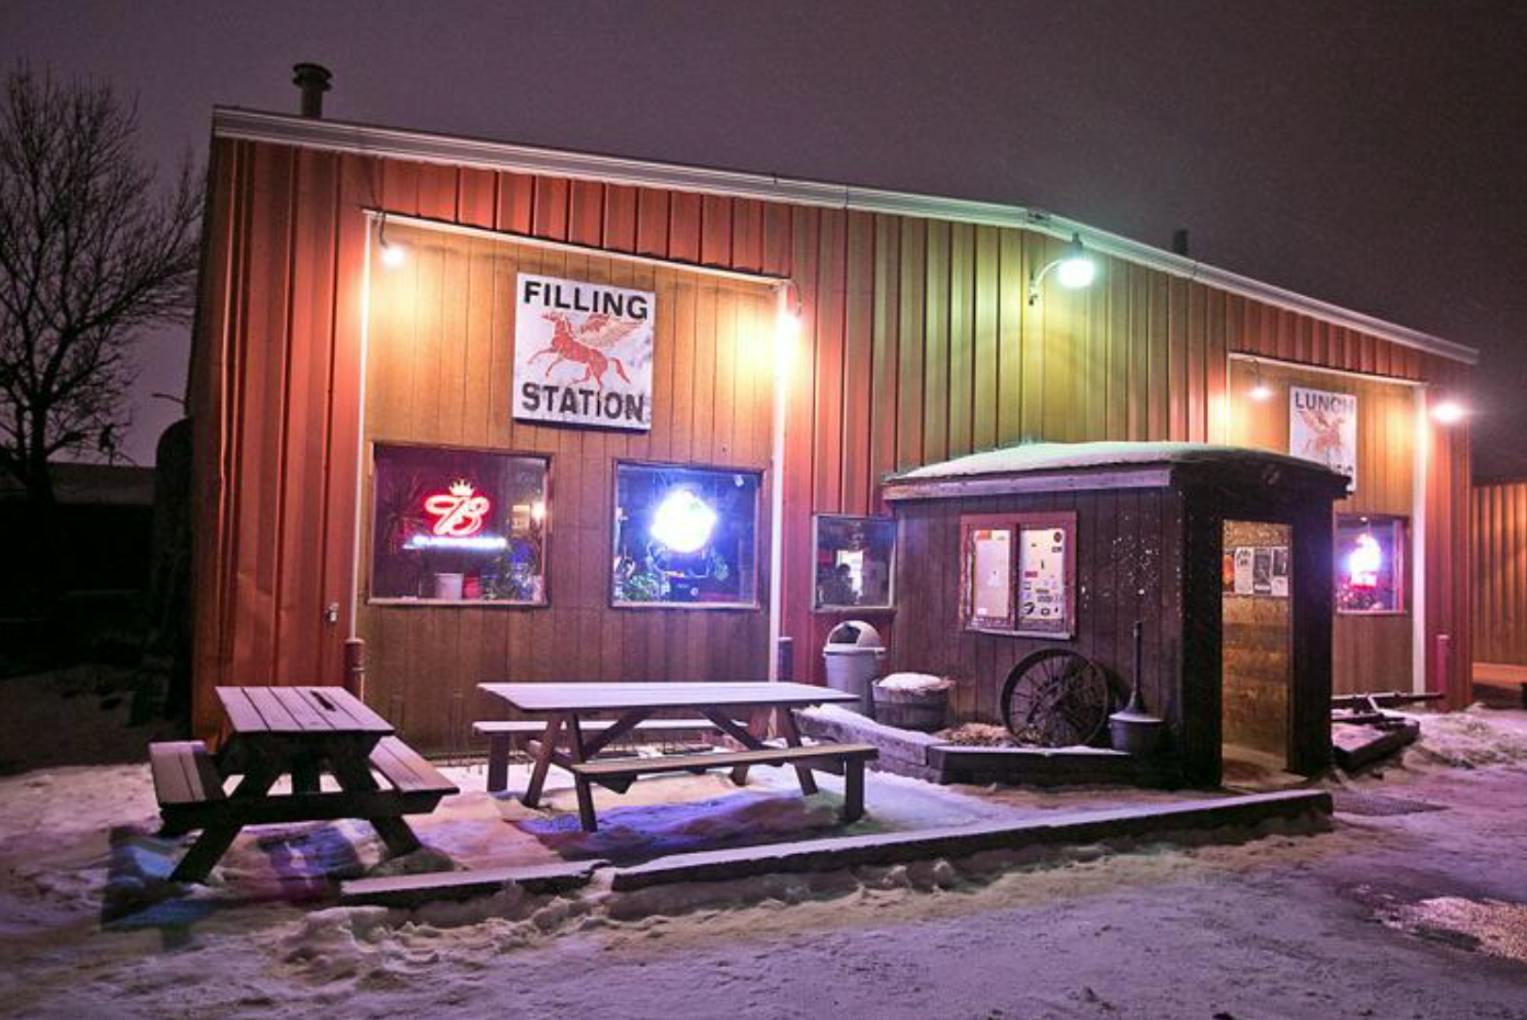 The outside of a bar in the snow. The sign says "Filling Station" and it is night time. 